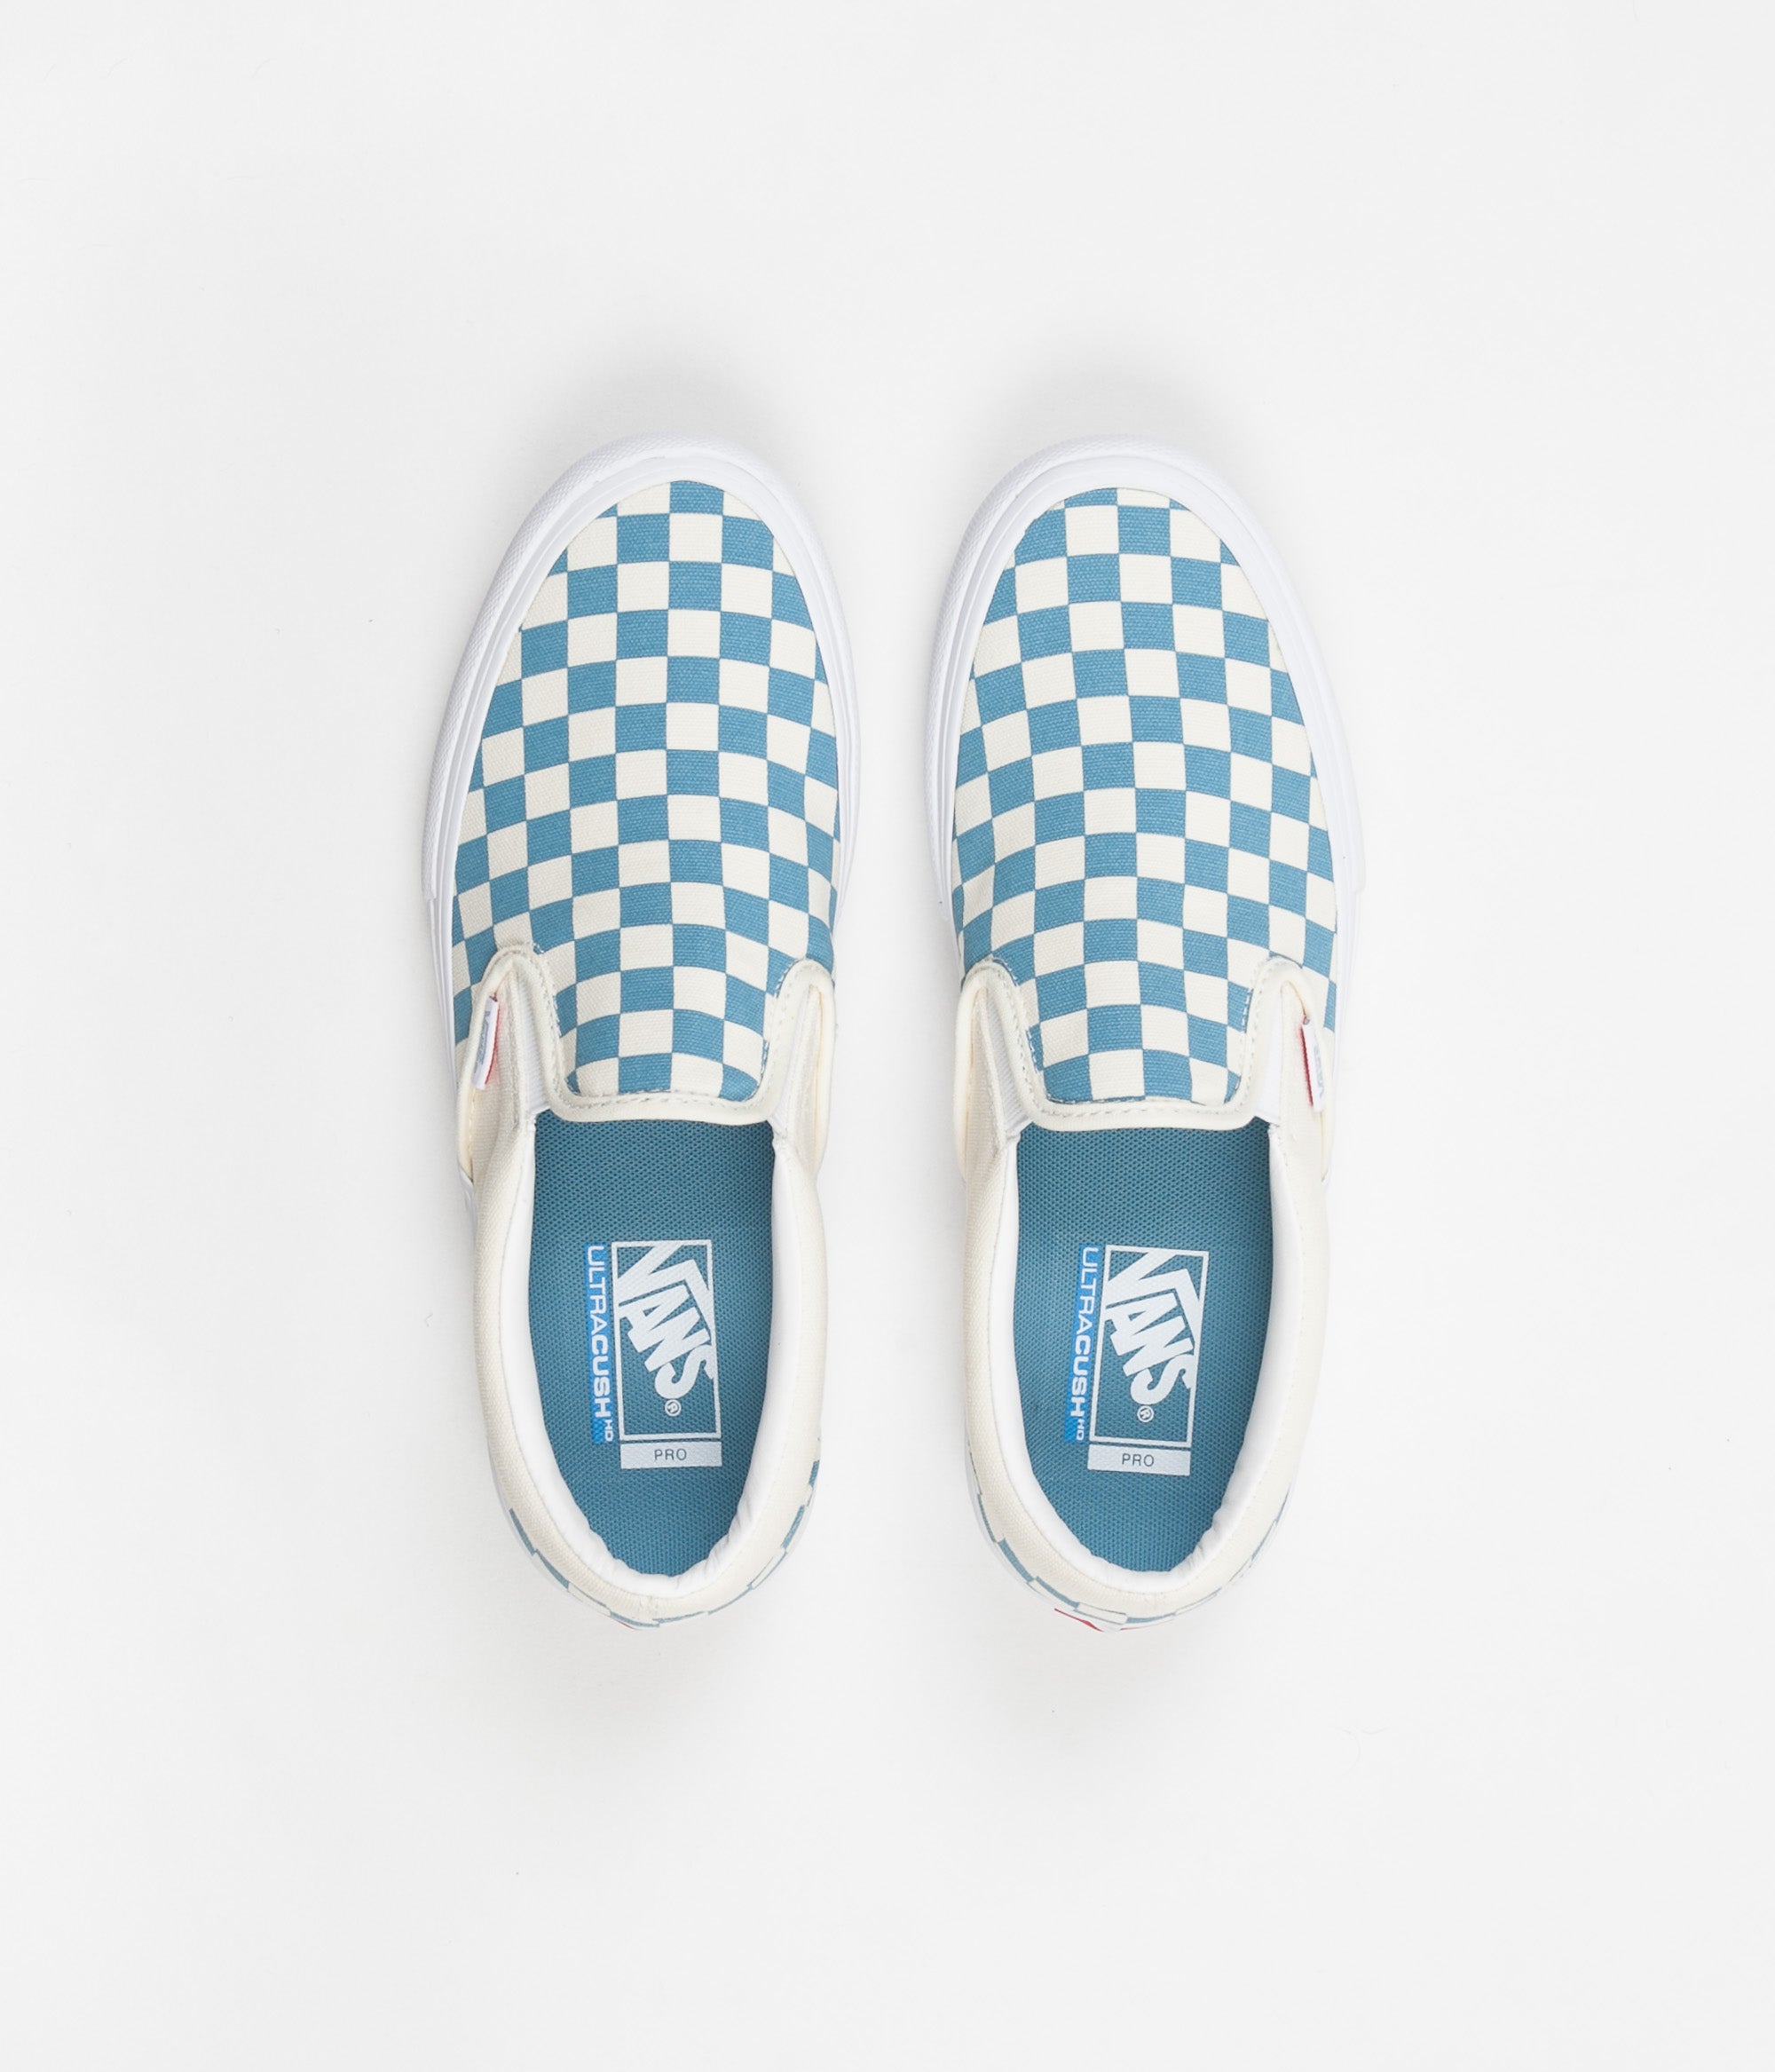 vans checkered shoes blue